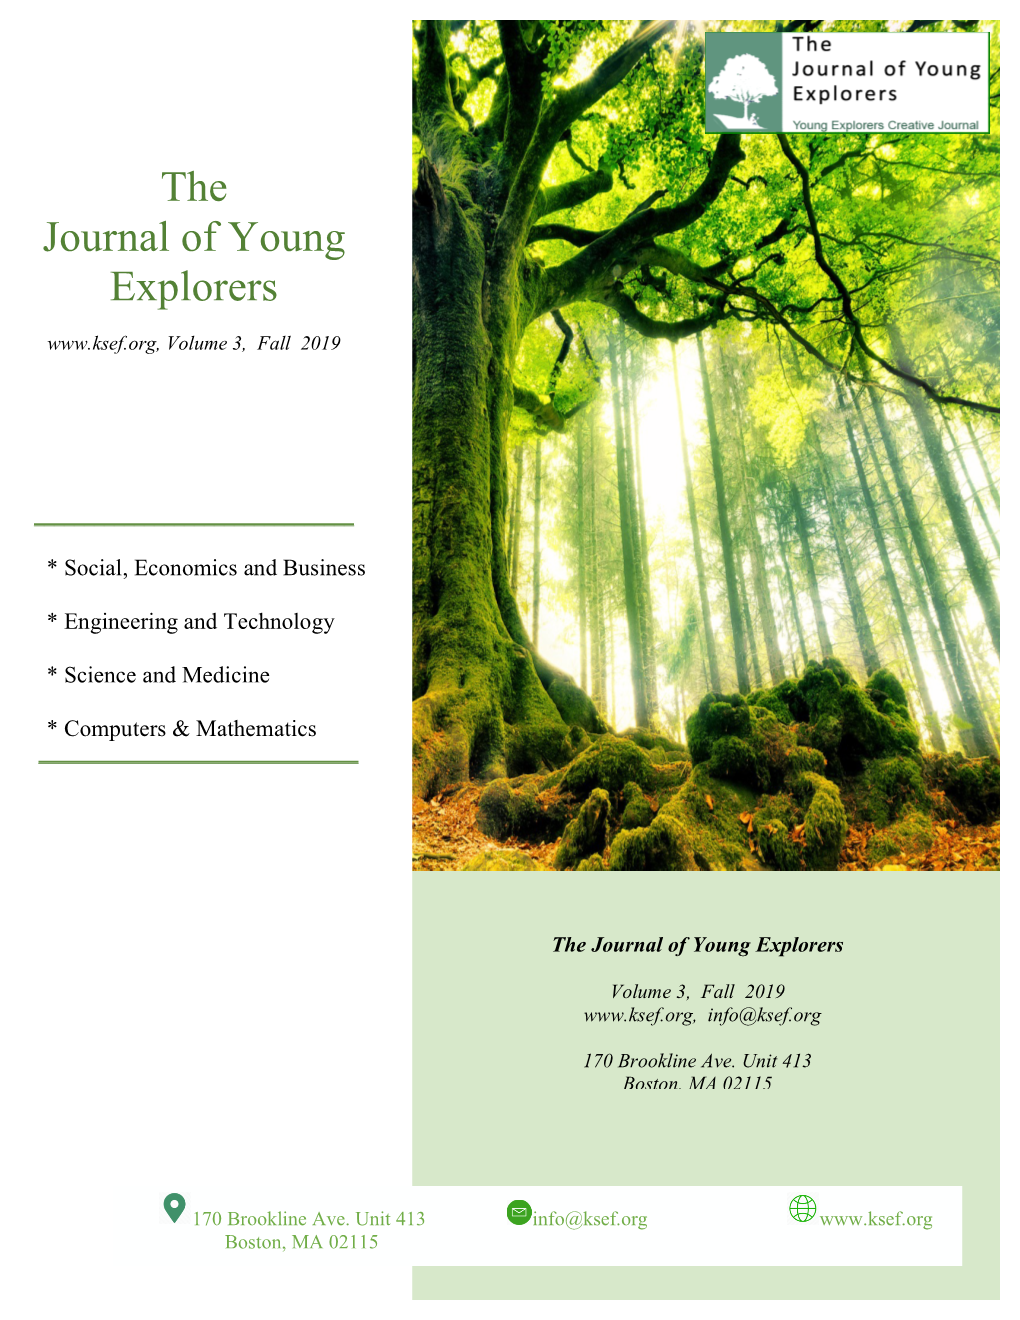 The Journal of Young Explorers